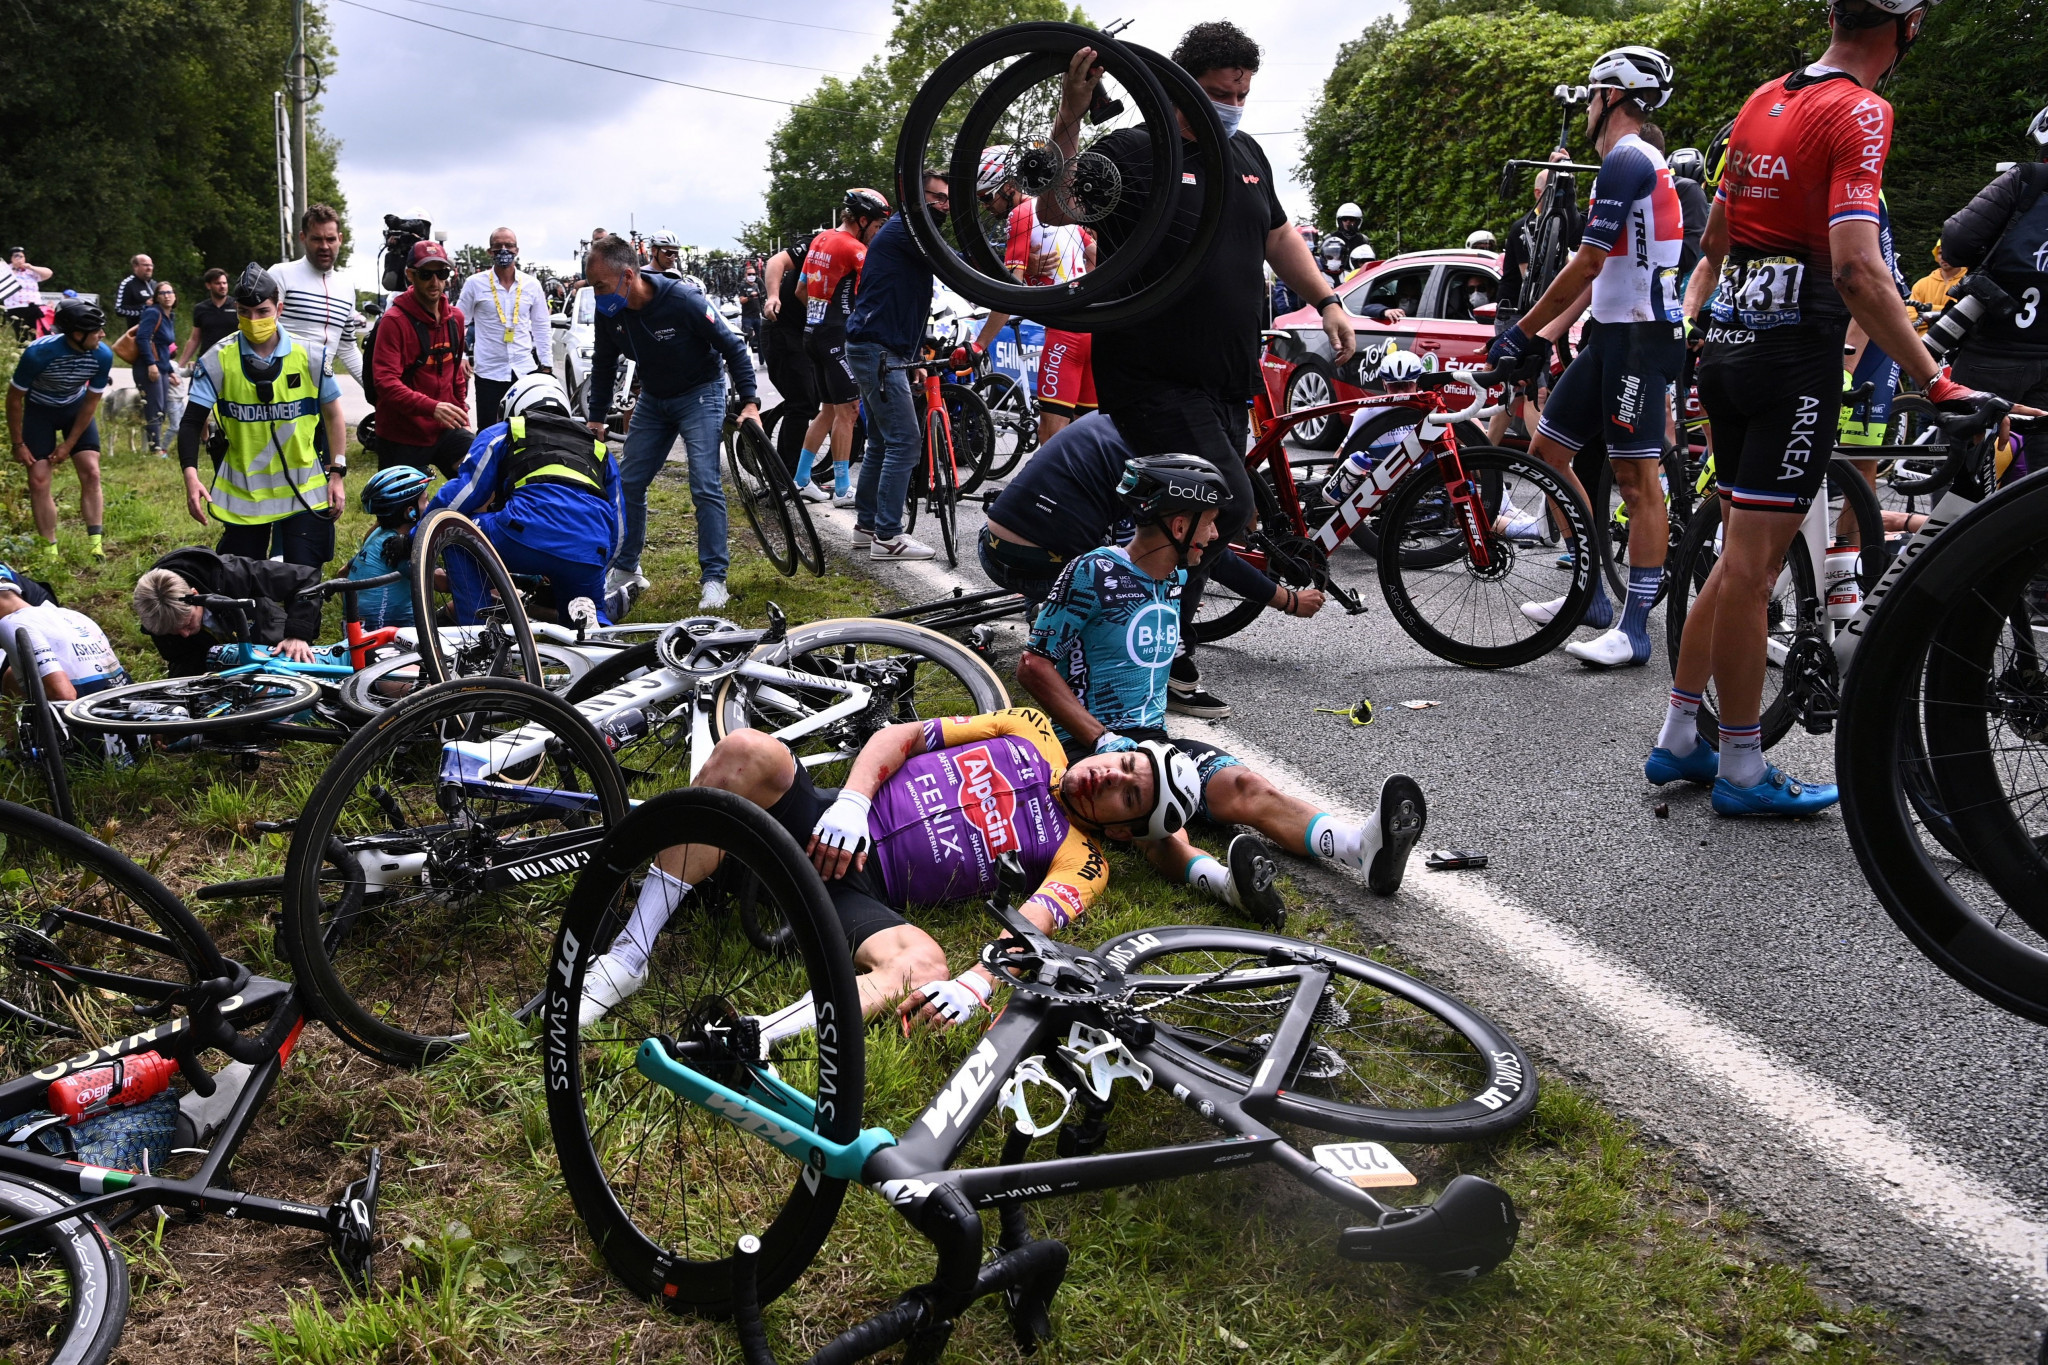 Several riders were injured followed the crash caused by the fan at last year's Tour de France ©Getty Images